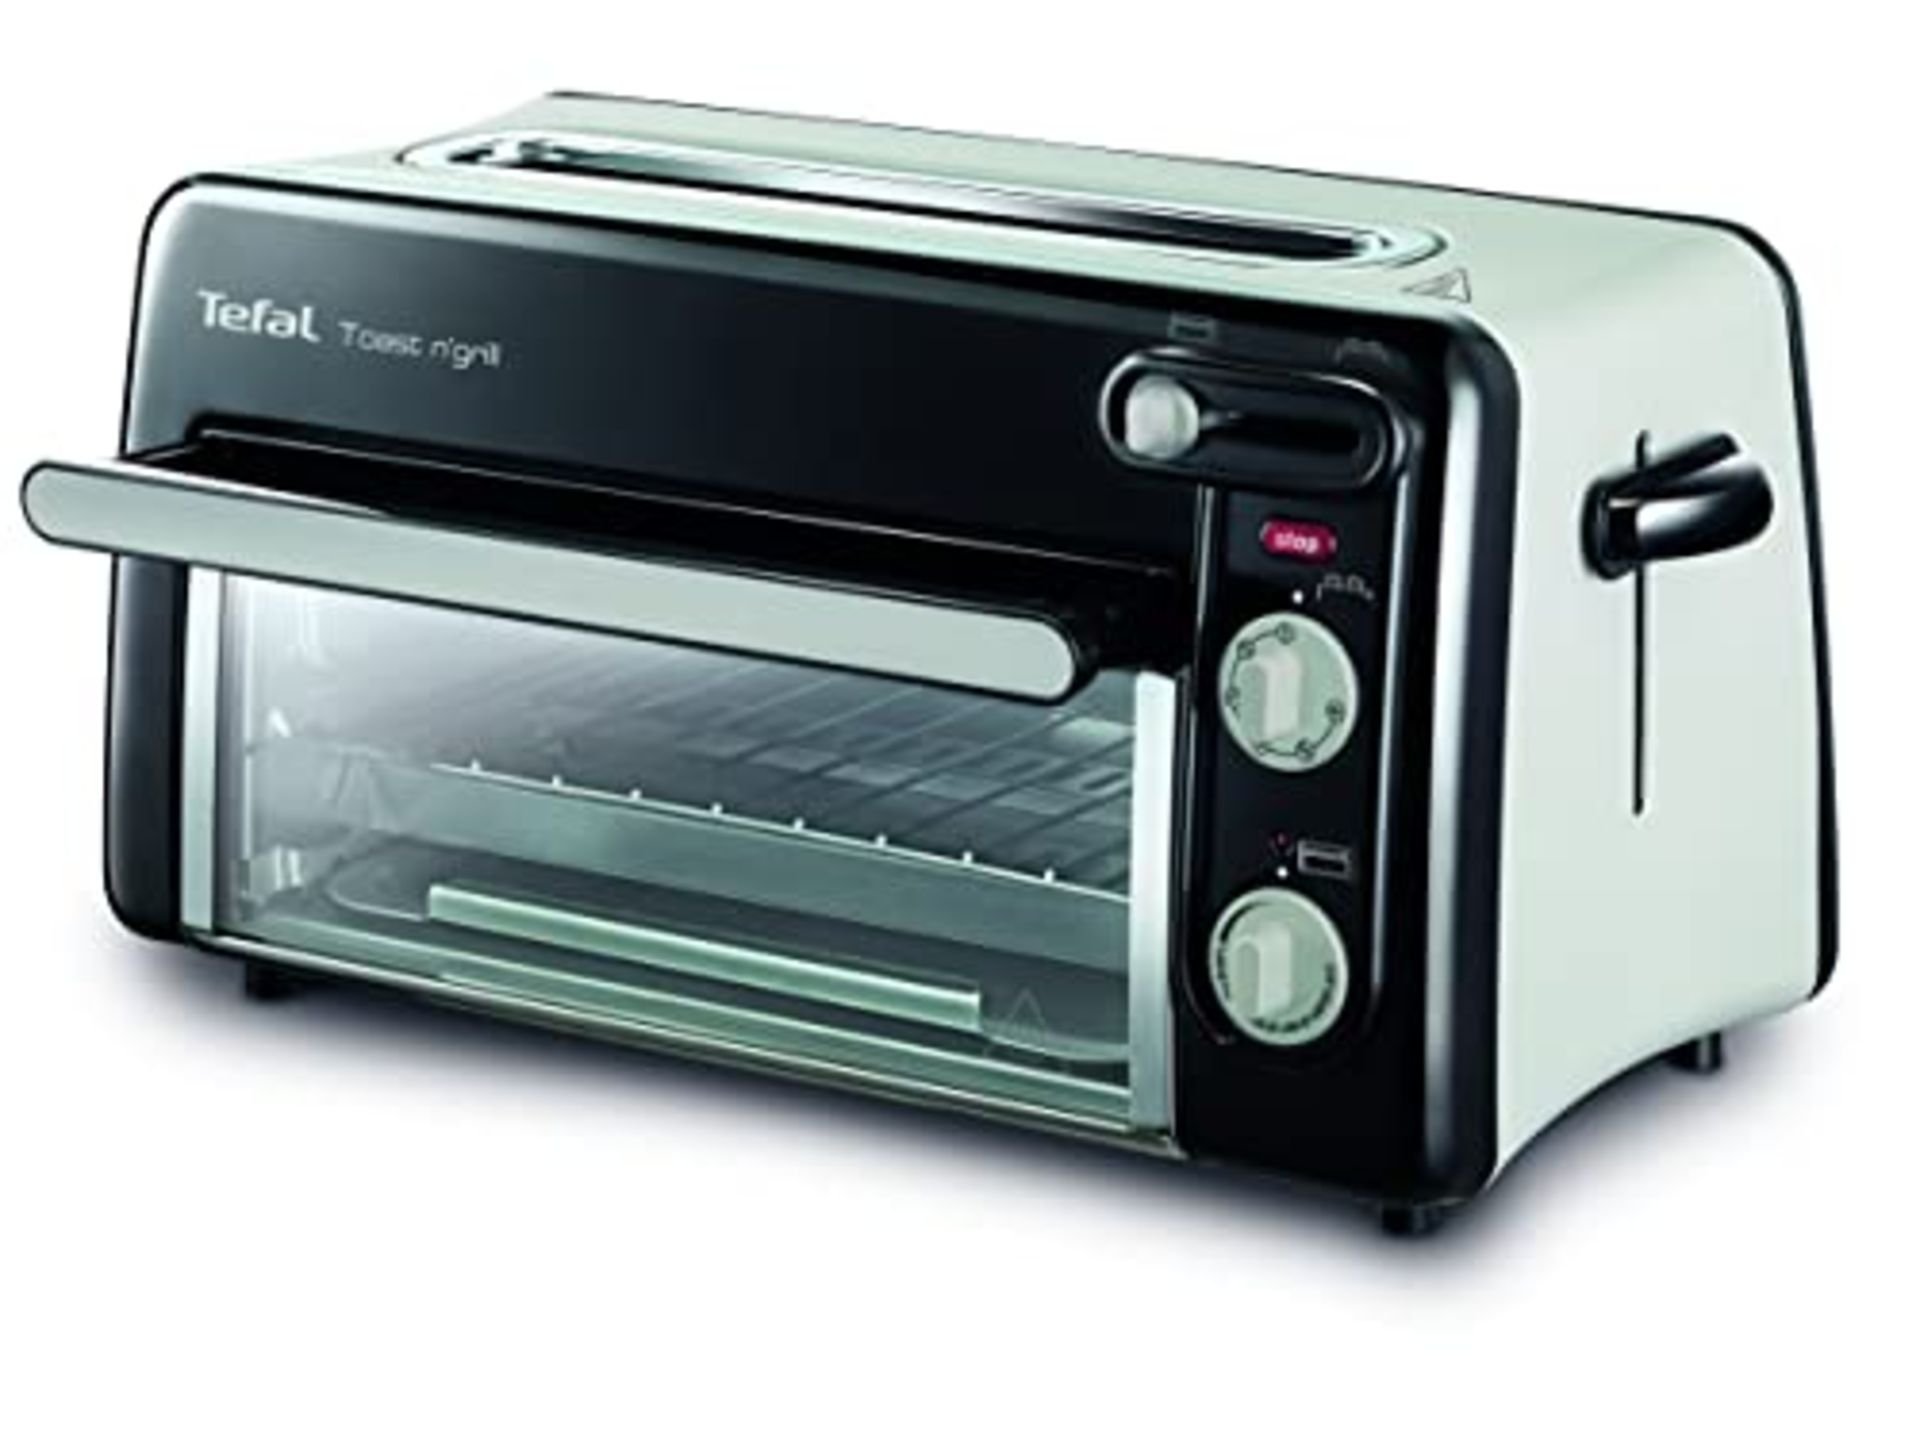 RRP £86.00 Tefal TL 6008 Toast n Grill 2 in 1 Toaster Grill and mini oven for toasting and grilli